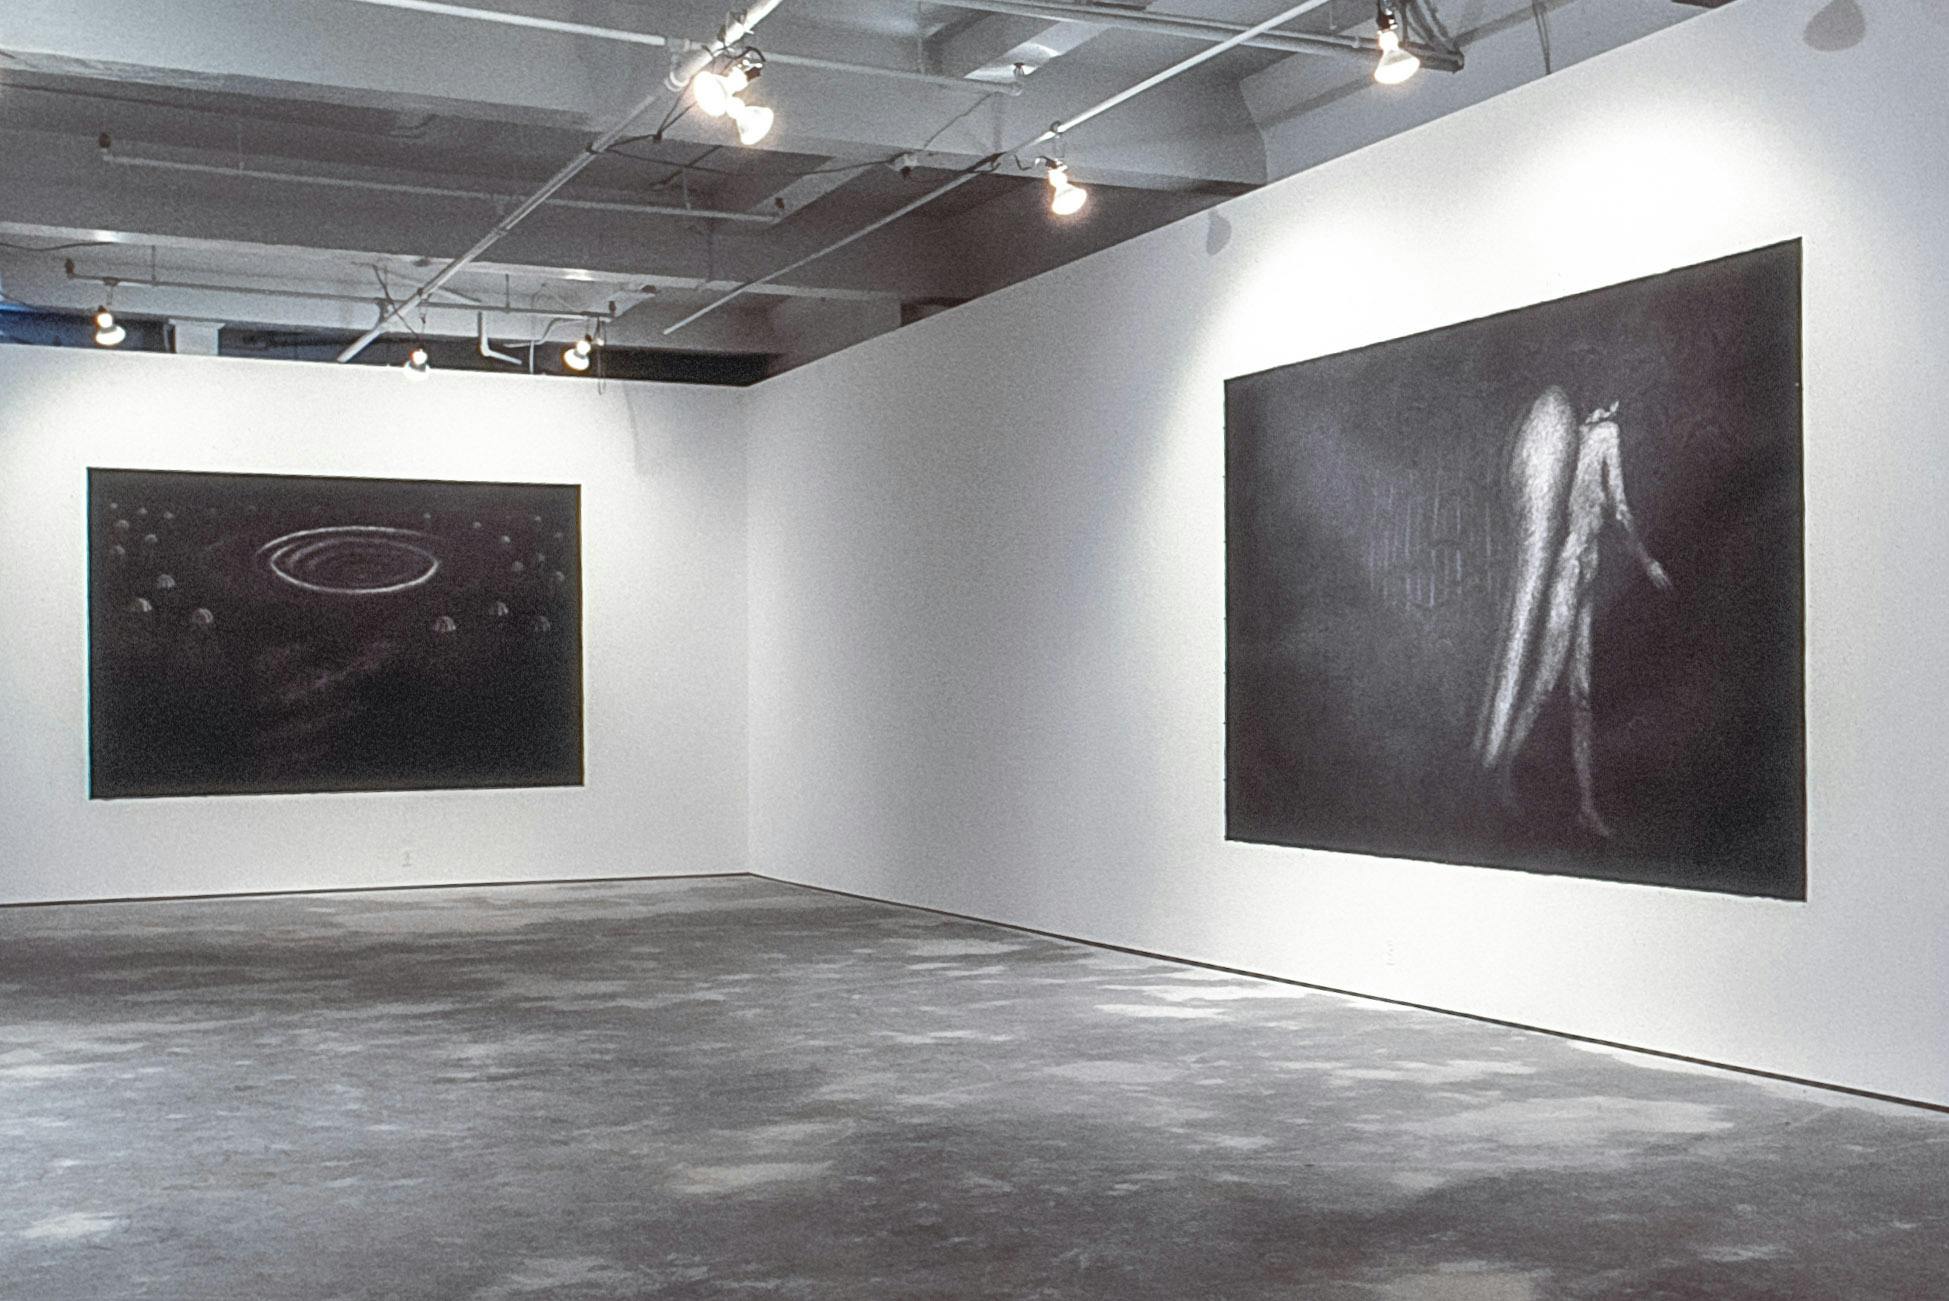 In the corner of a gallery, there are two large, dark charcoal drawings on the walls. One drawing shows a galaxy with planets and swirls. The other shows a nude angel walking, with their face turned.